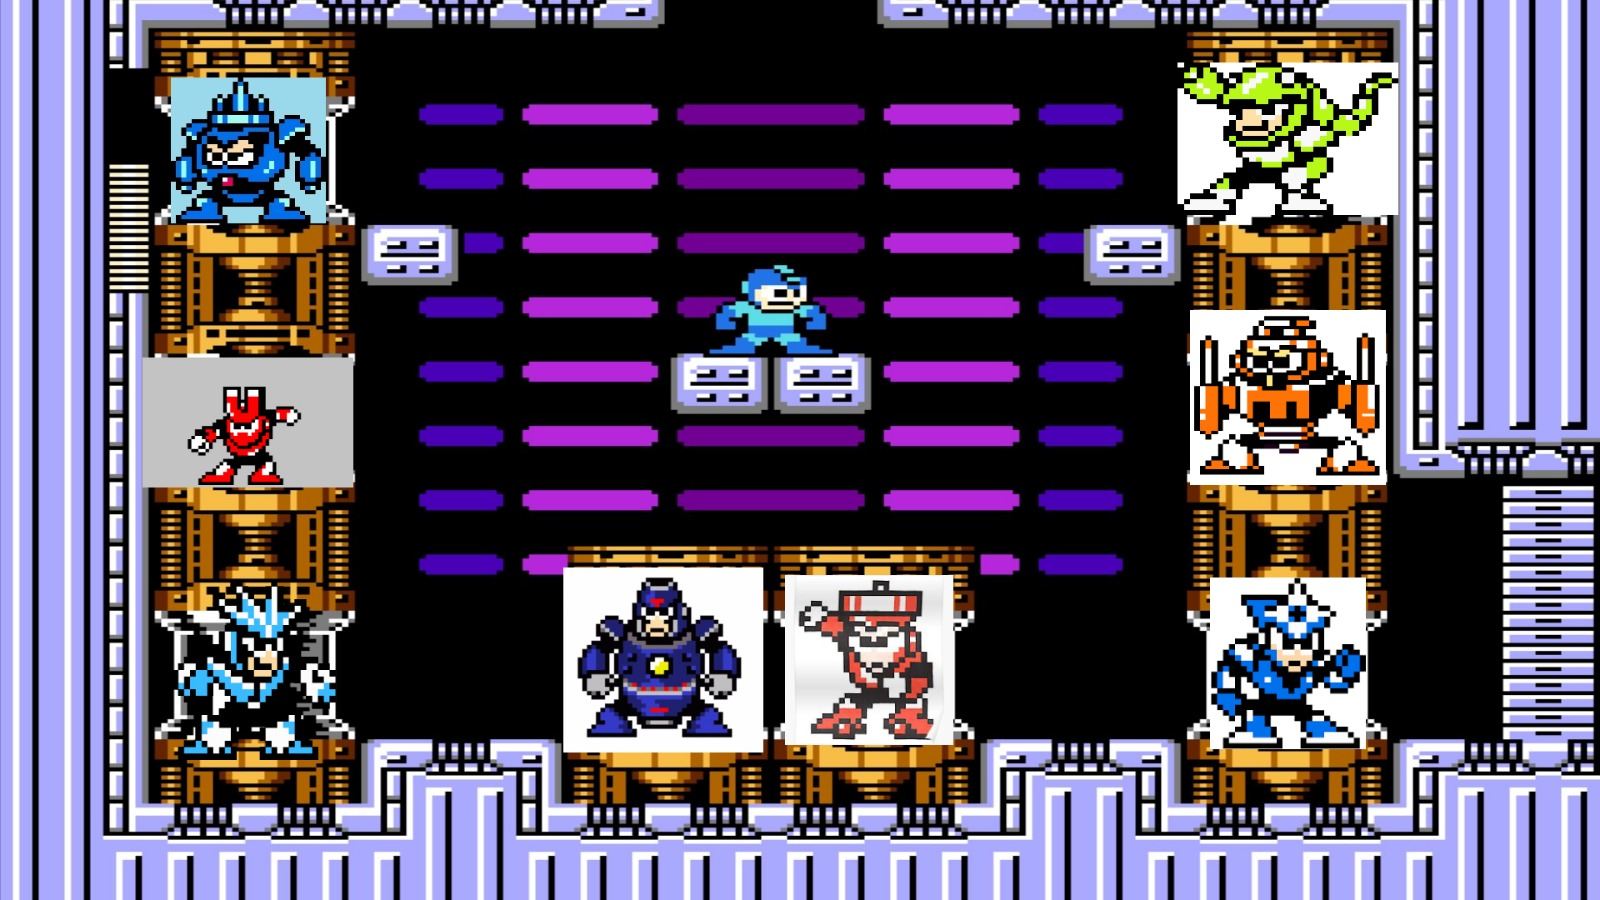 wily-castle-stage-4-mega-man-legacy-collection-walkthrough-neoseeker